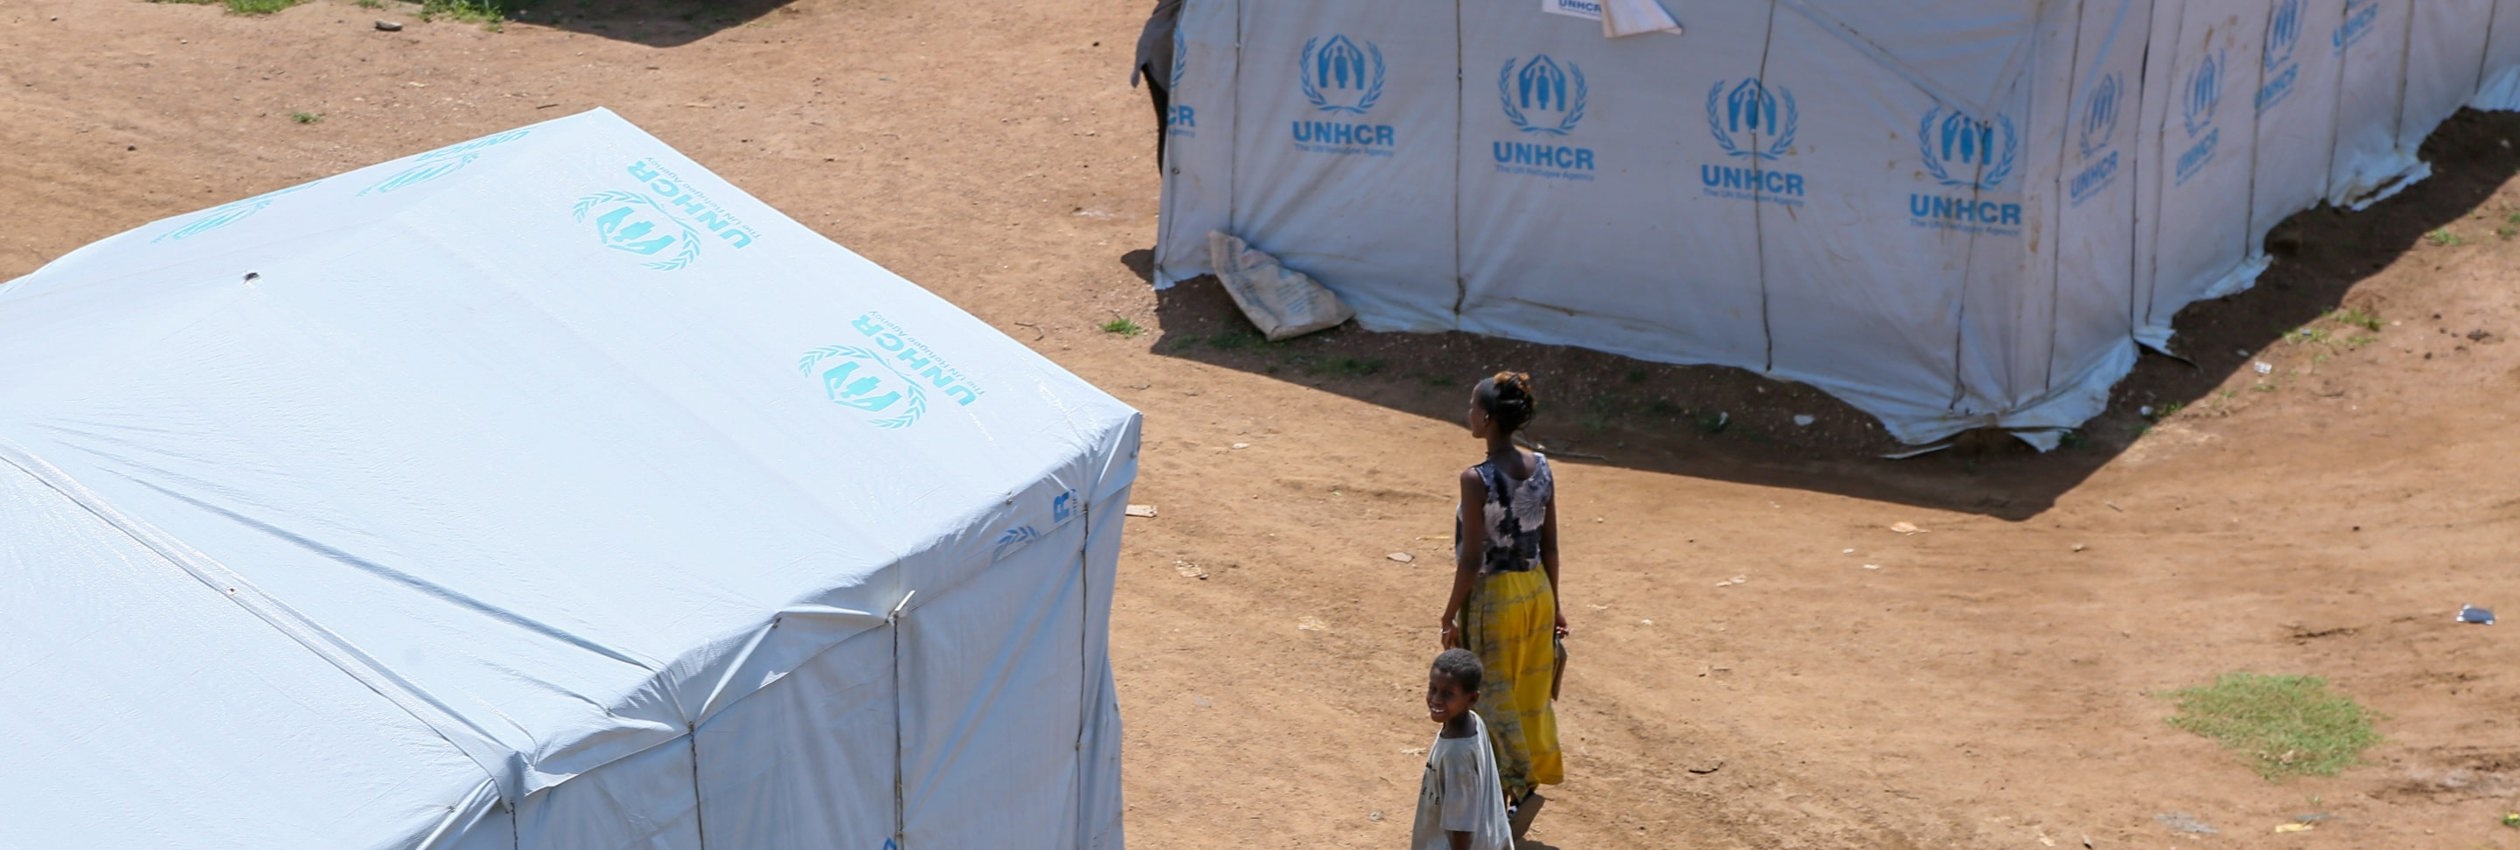 Families displaced by the ongoing conflict in the Tigray region find shelter in an IDP site called Five Angels in Shire where UNHCR has set up shelter to provide a roof to displaced families.